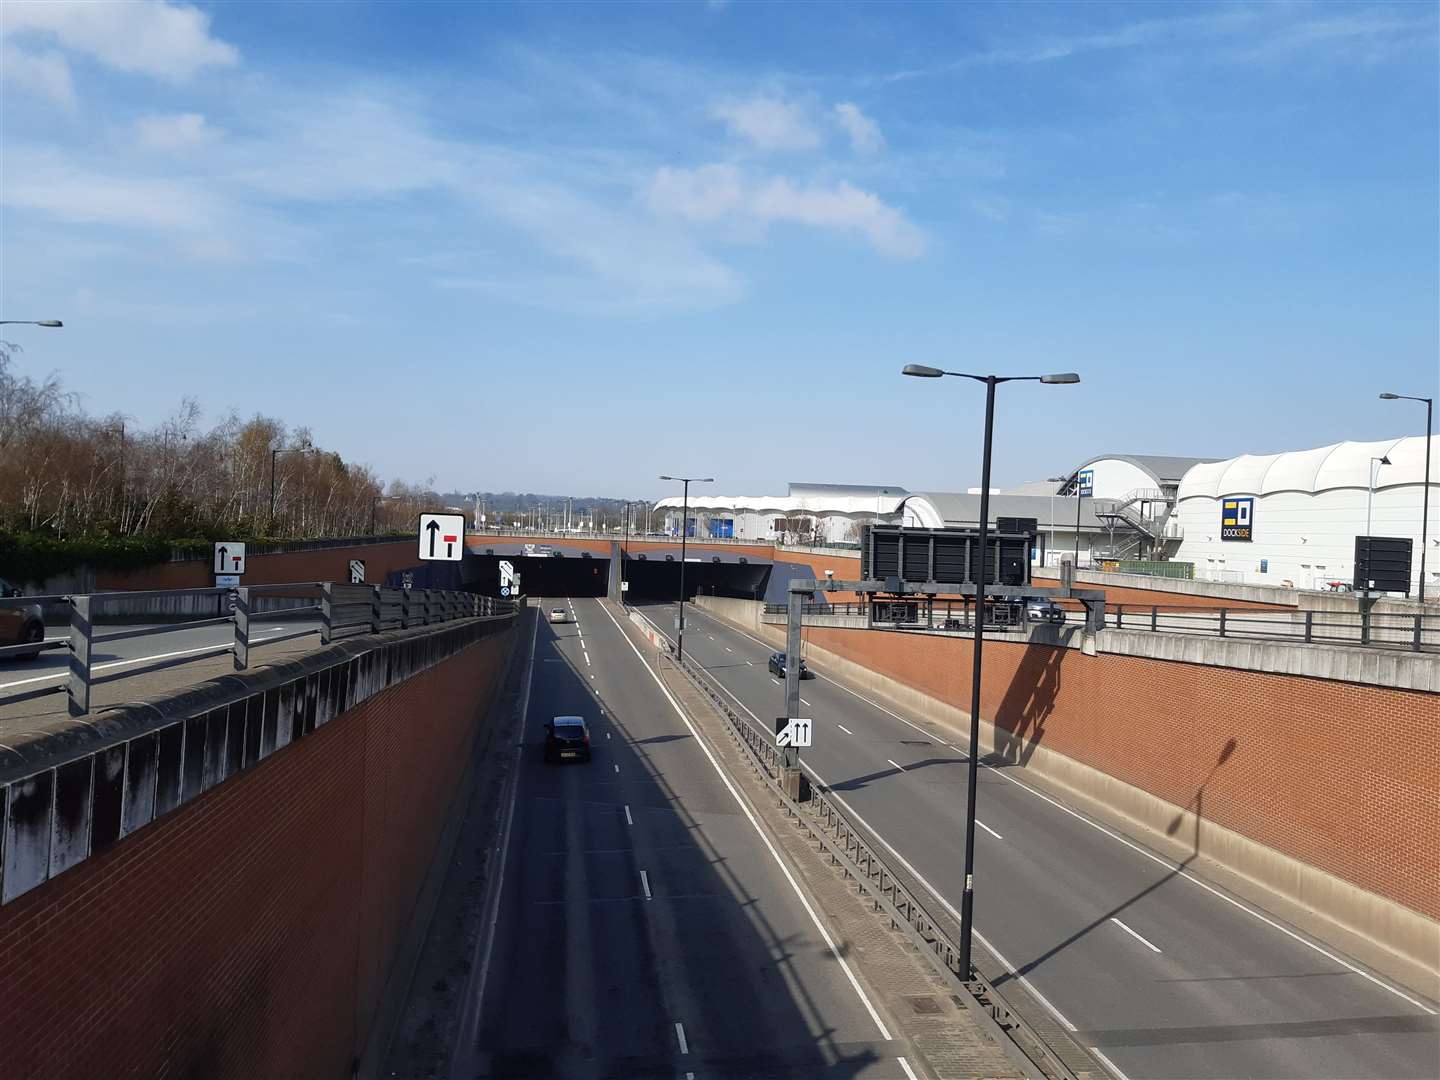 The Medway Tunnel has been shut eastbound due to a police incident